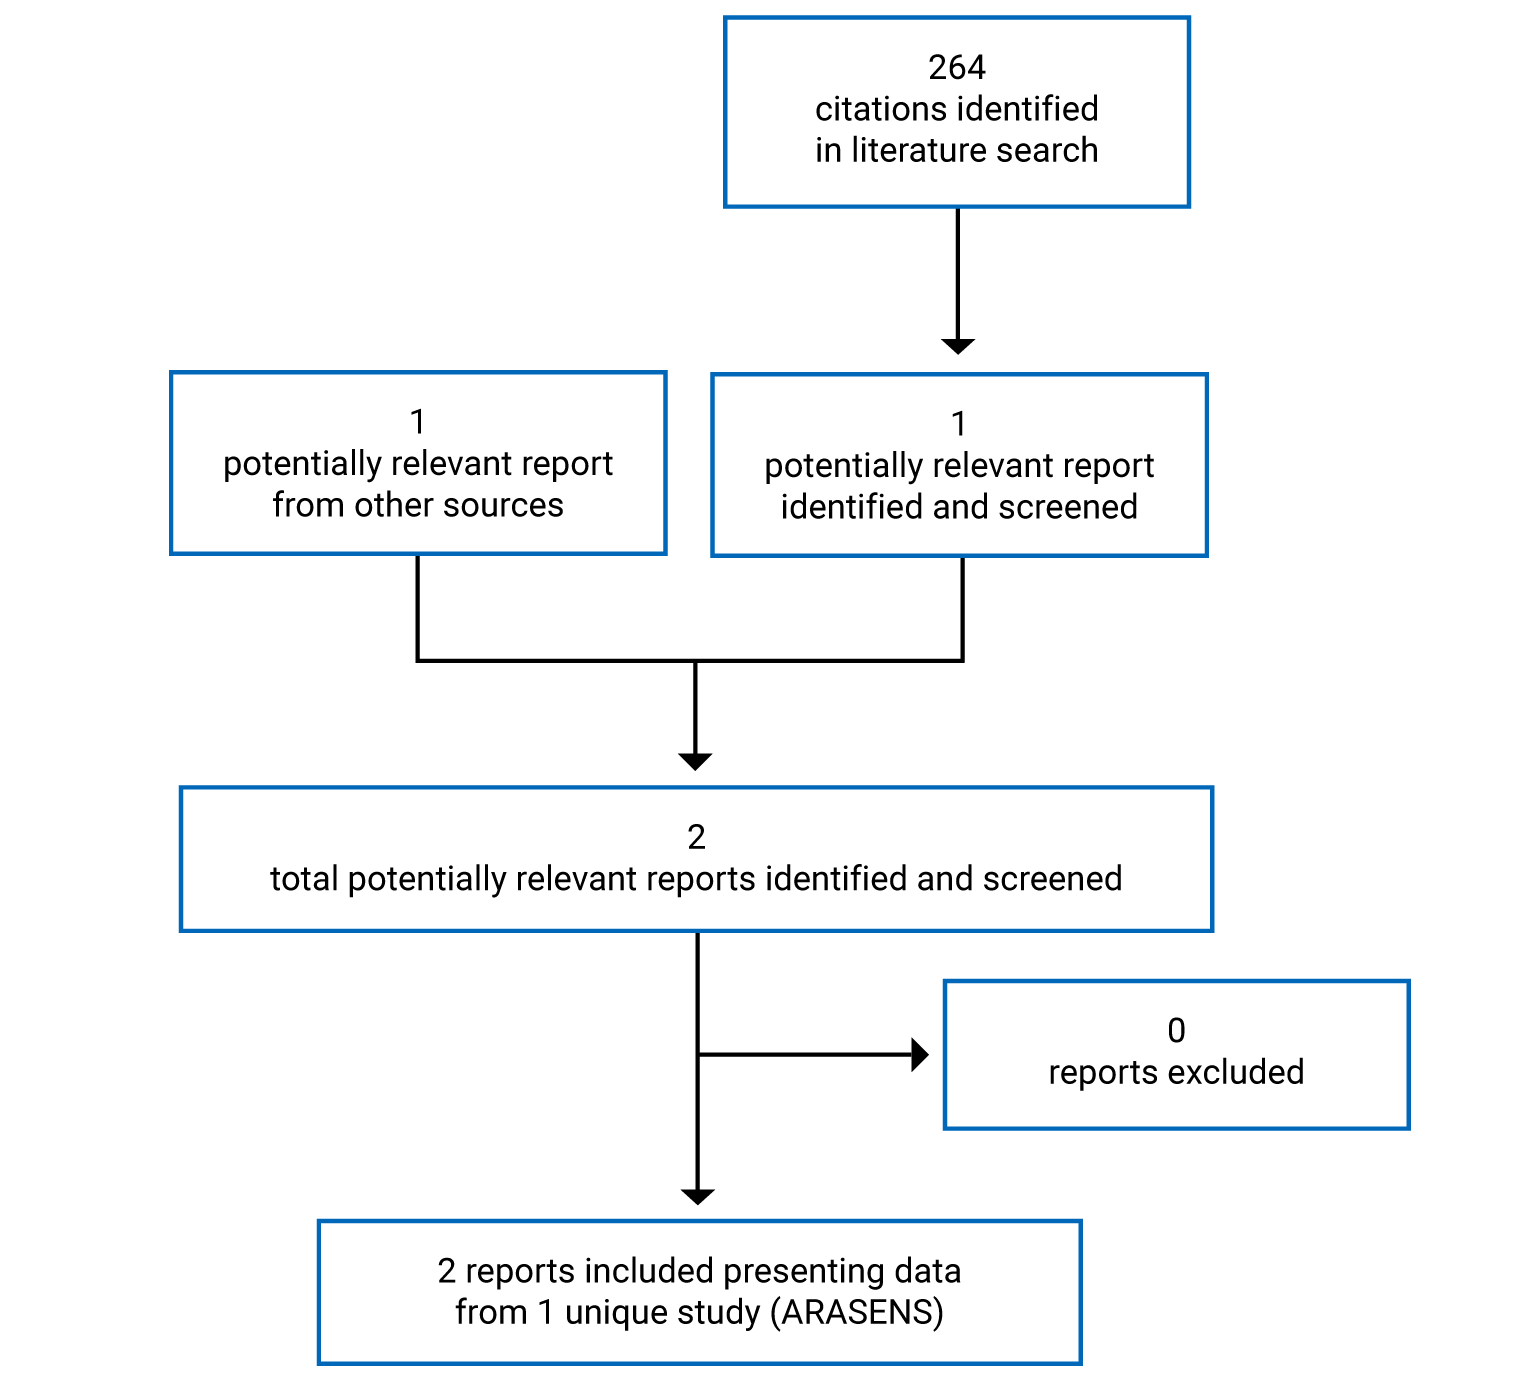 A total of 264 citations were identified in the literature search, of which 1 was potentially relevant. One additional report from other sources was potentially relevant. After full-text reports were reviewed, 2 reports representing 1 unique study (the ARASENS trial) were included in the systematic review.